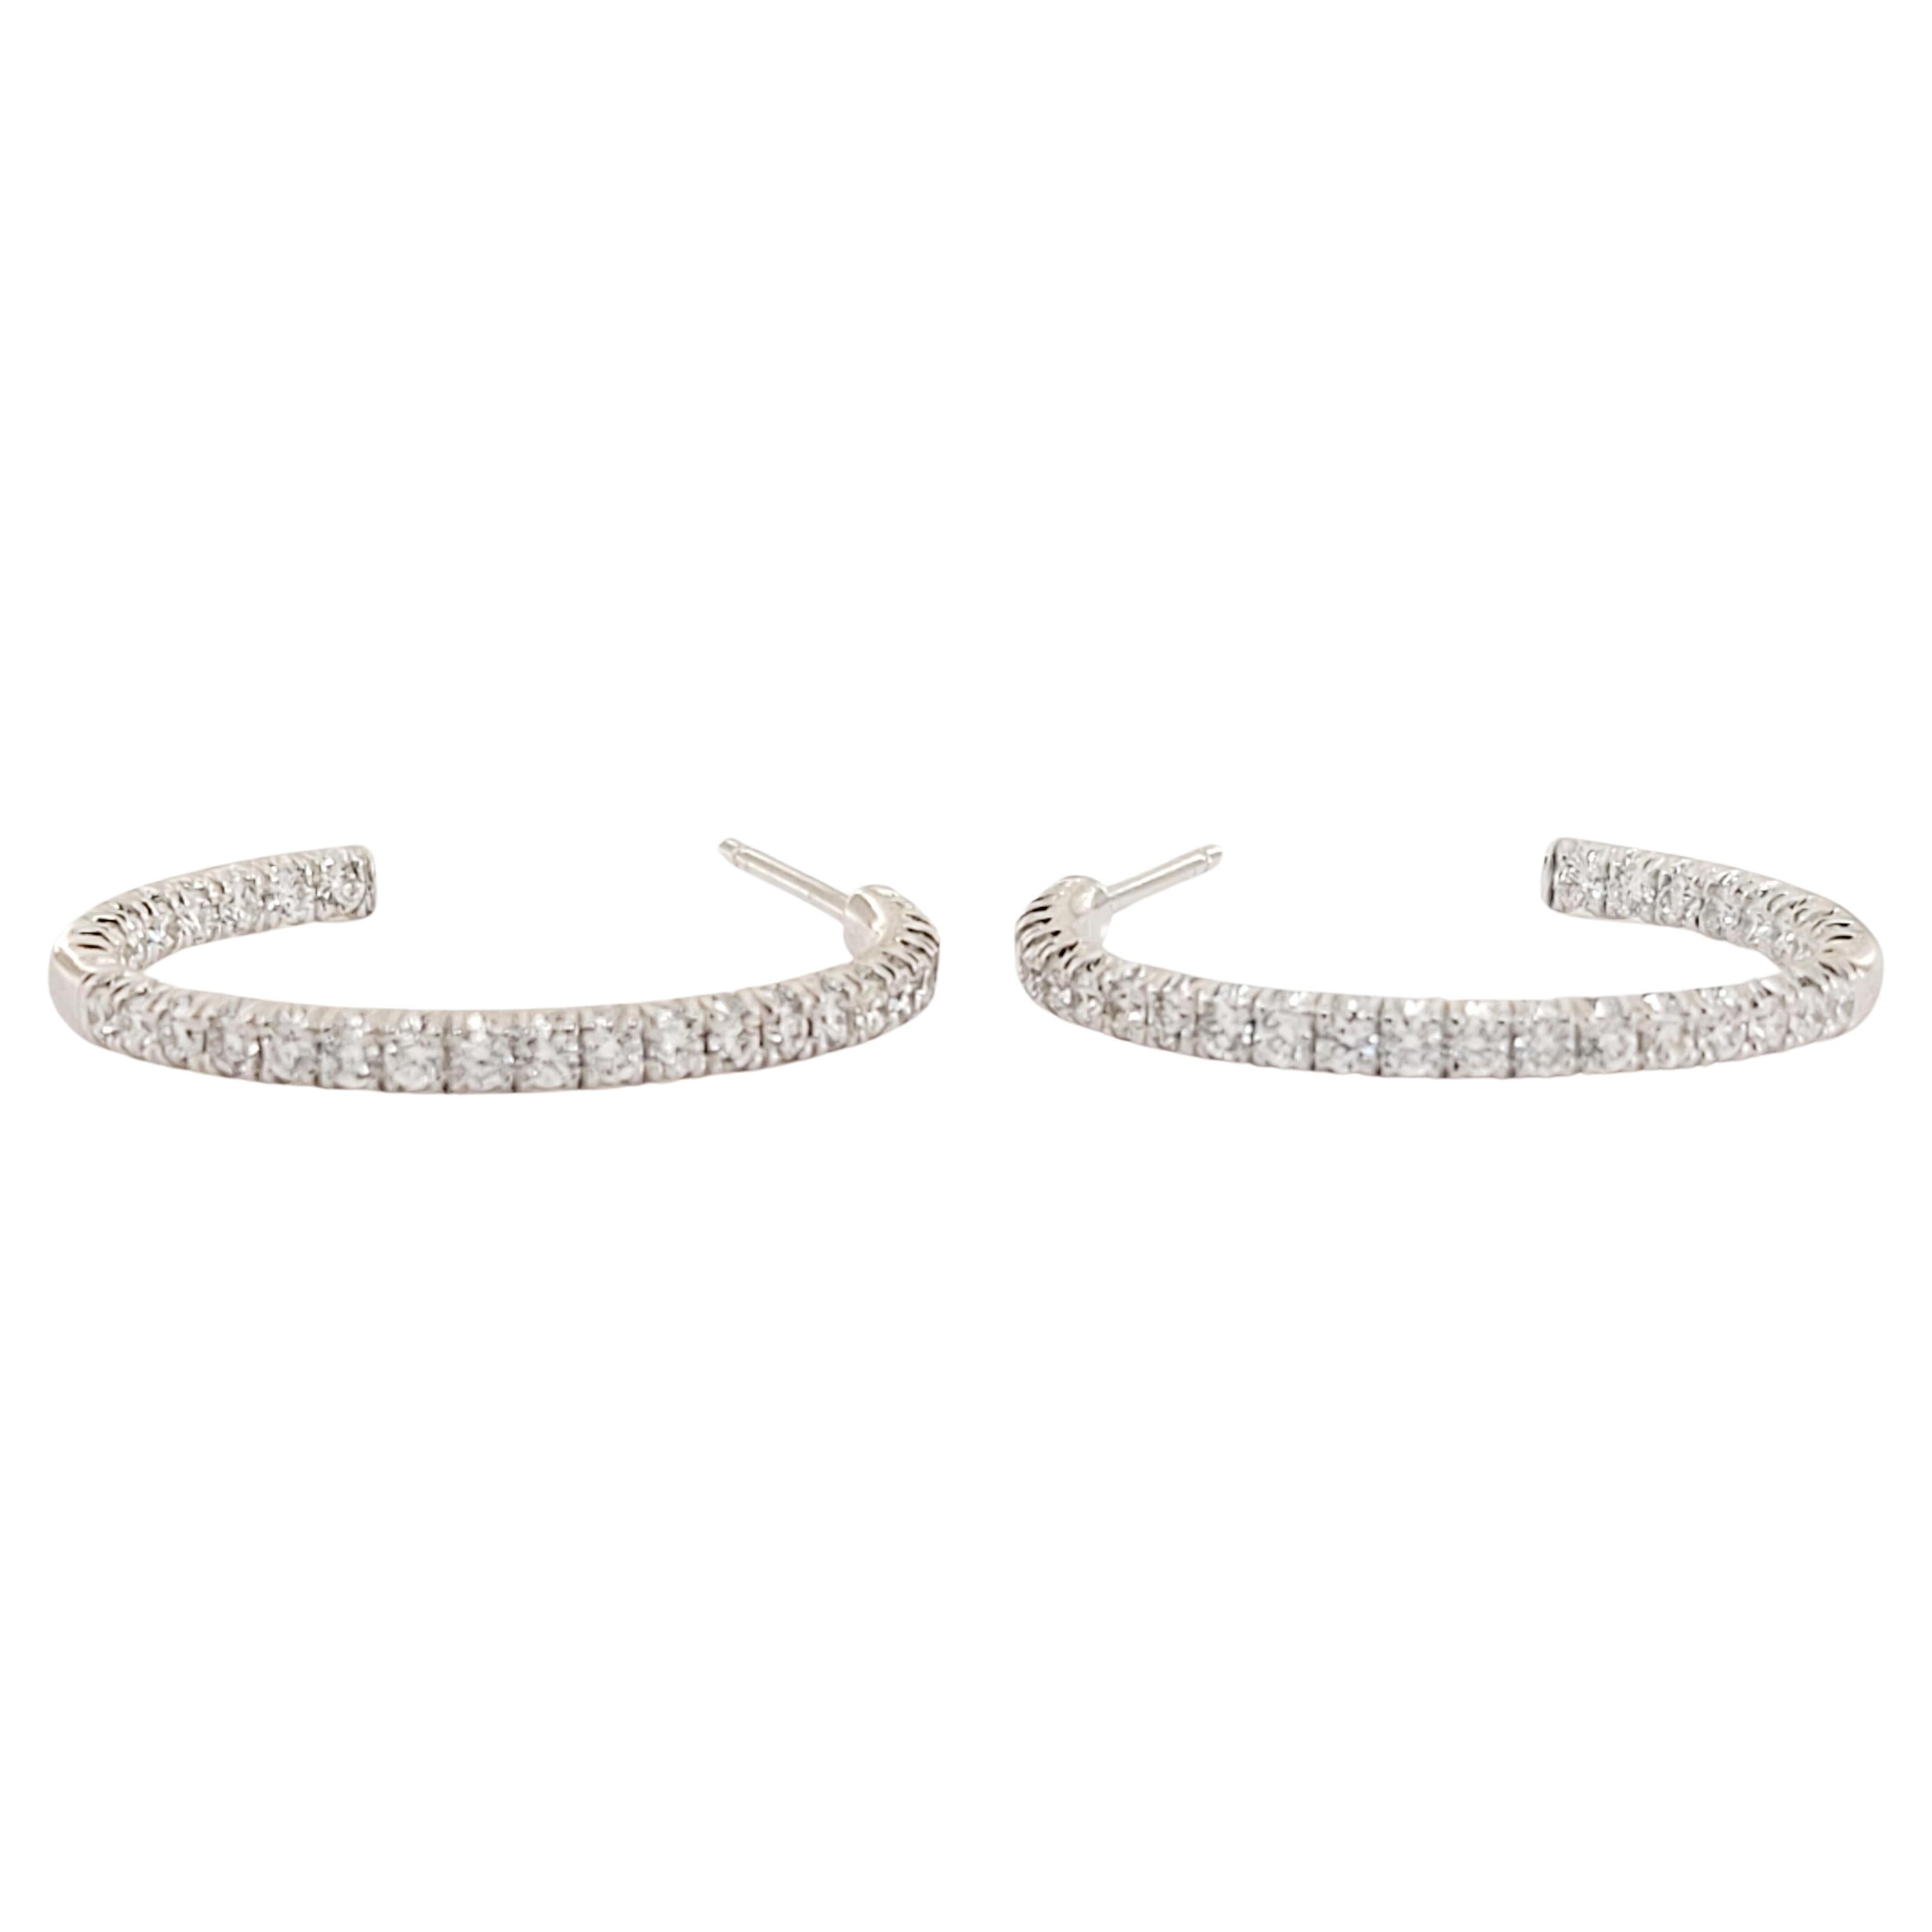 Brand Tiffany & co
Condition Never worn
Metro Diamond hoop earrings 
Hoop earrings 22.6mm
18K White Gold
Main stone Diamond
Diamond 0.56cts
Diamond clarity VS
Color Grade G
Weight 3.9gr total
Comes with Tiffany & co earring  box